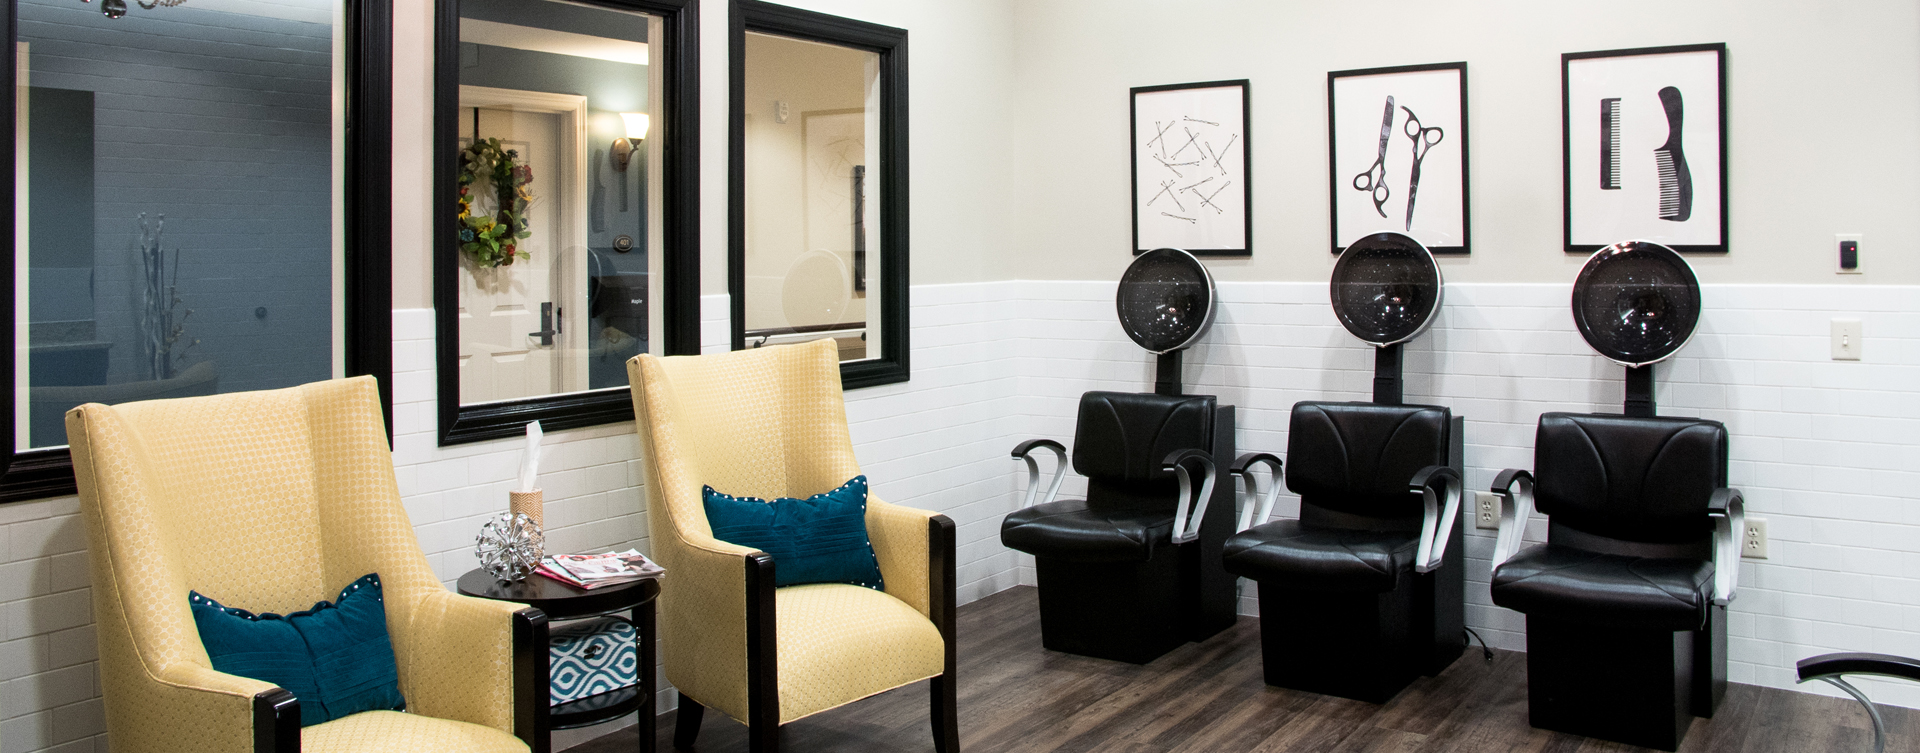 Receive personalized, at-home treatment from our stylist in the salon at Bickford of Chesterfield